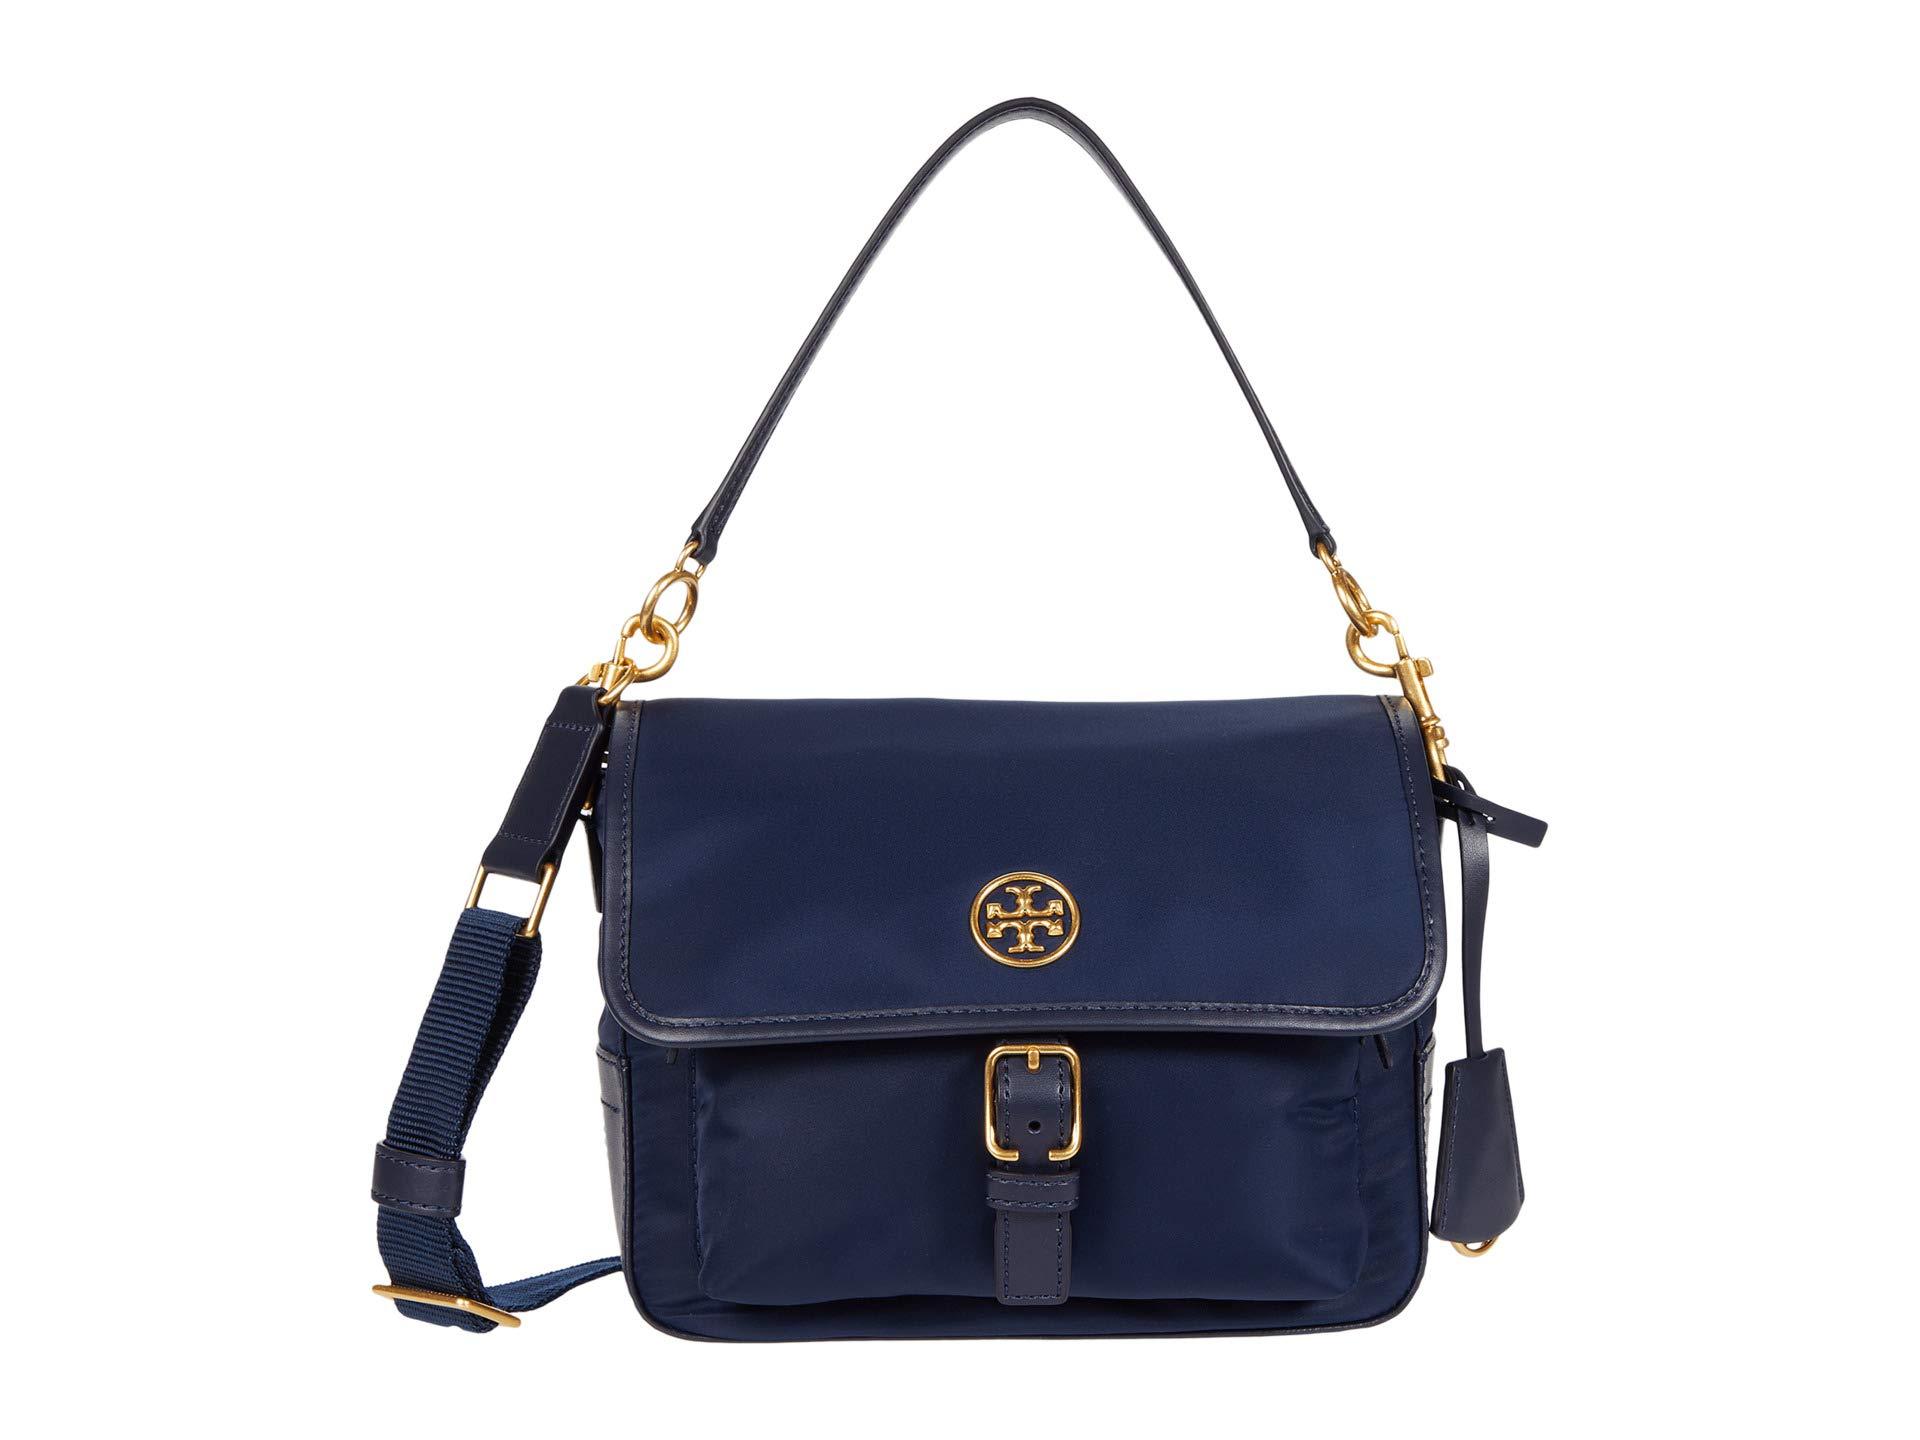 Tory Burch Leather Piper Crossbody in Navy (Blue) - Lyst